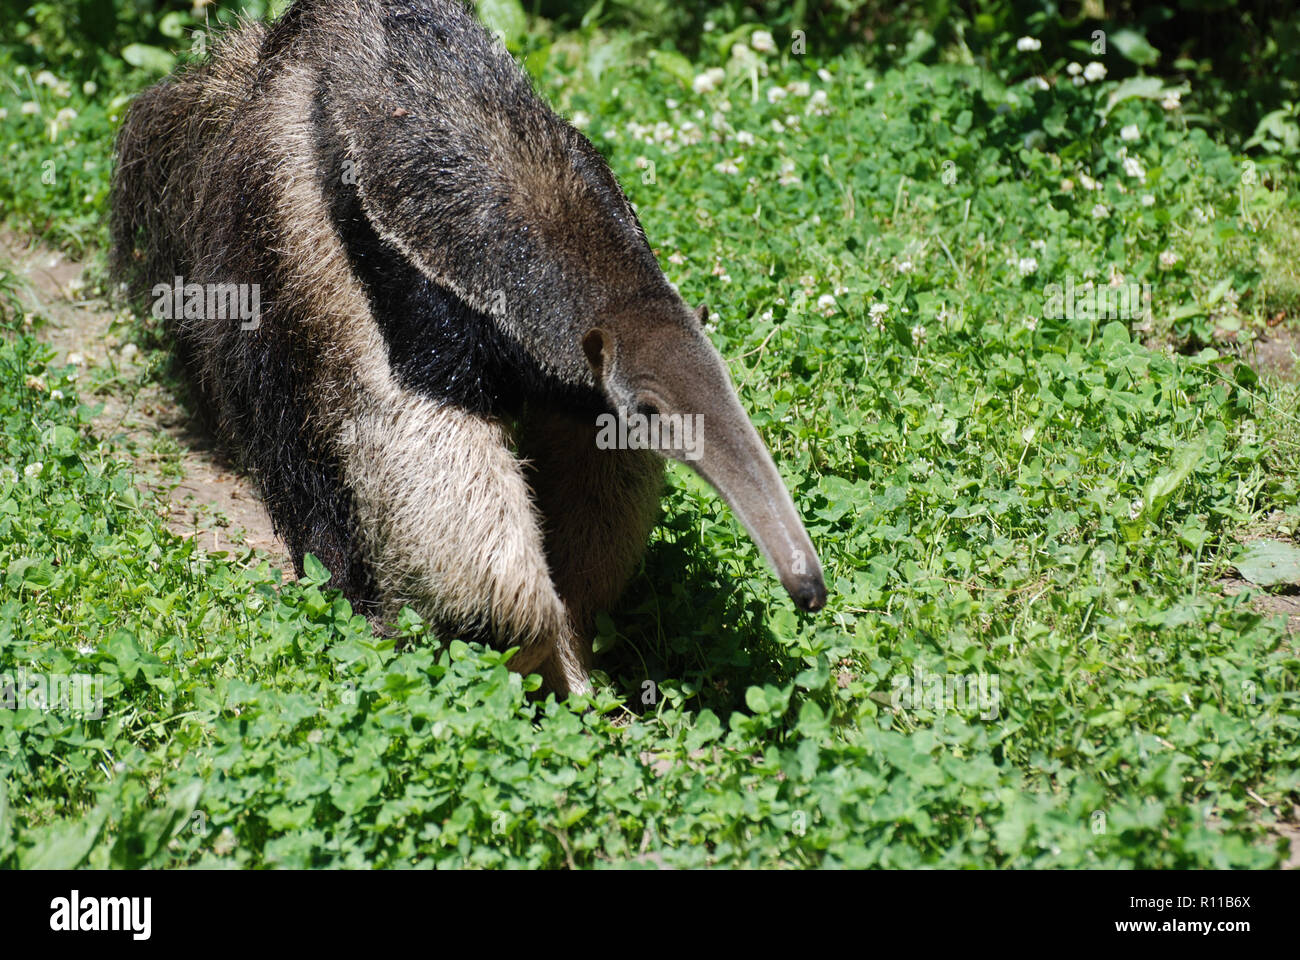 Long furred giant anteater up close and personal. Stock Photo